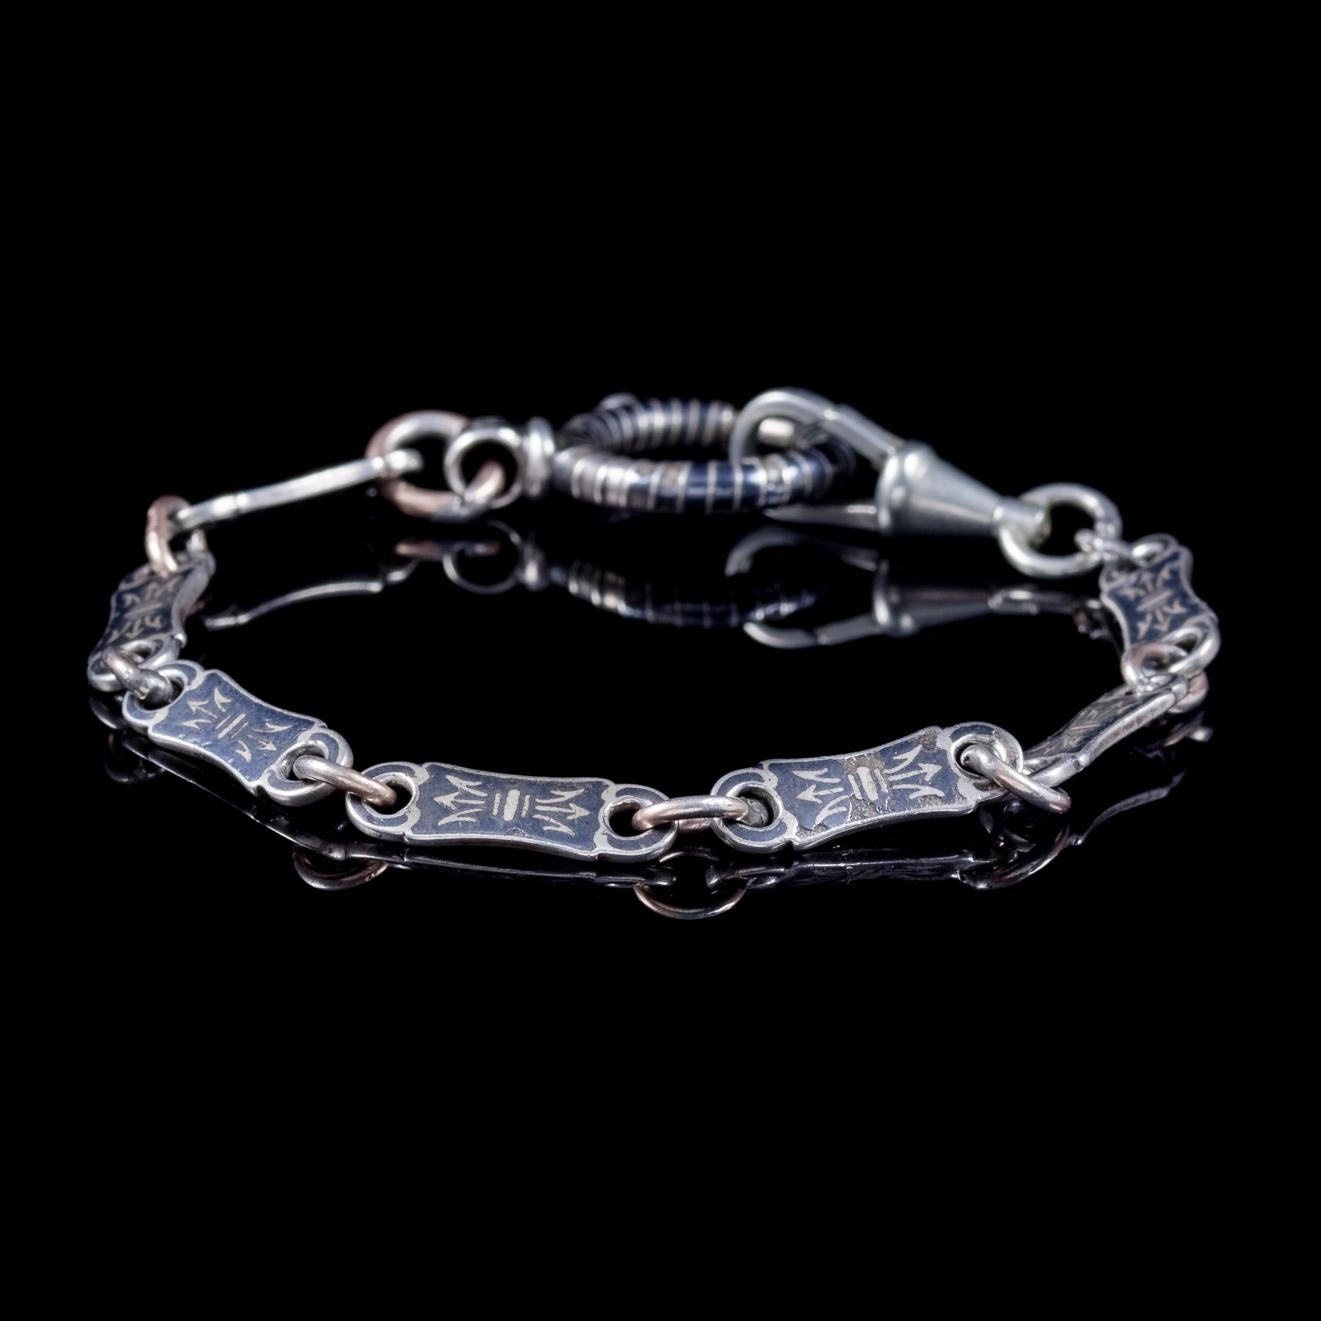 A quality antique Victorian bracelet C. 1900, made up of lovely Silver links with black Niello artistry displayed throughout. 

Niello is a black alloy that fuses into an etched or engraved metal base to create a fabulous decorative effect that